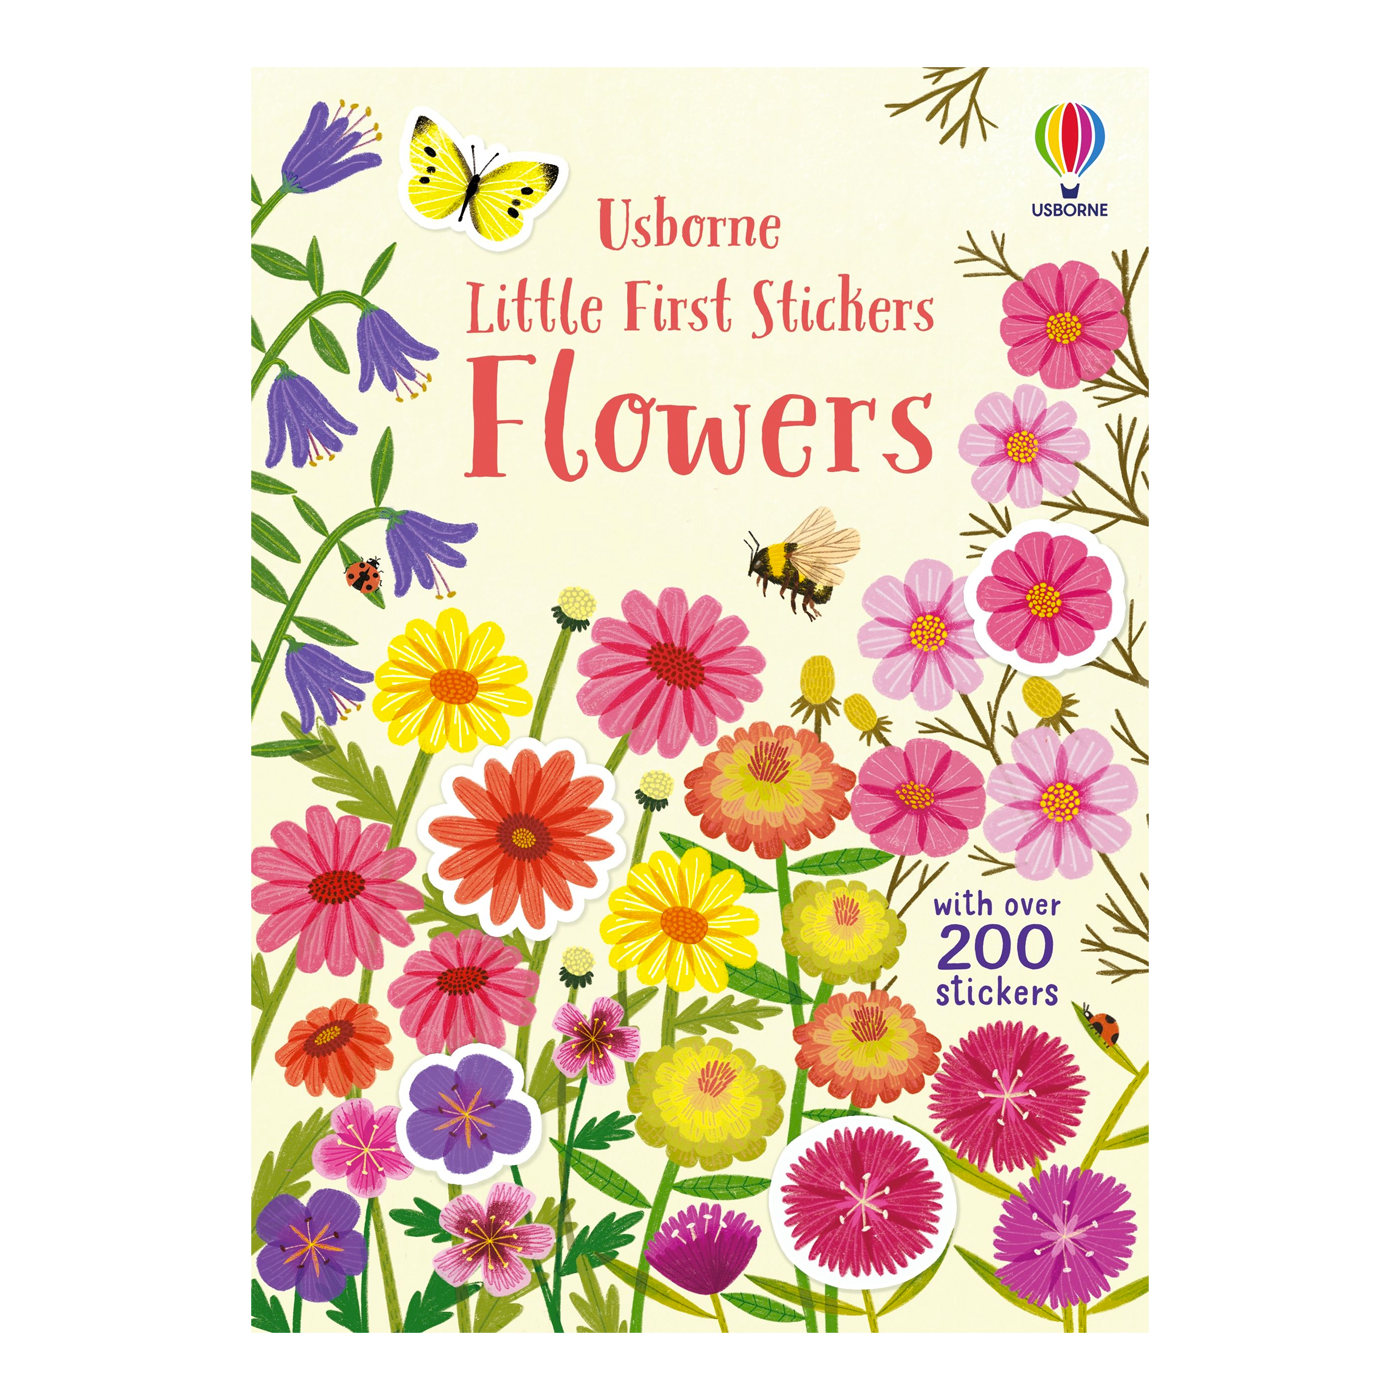  Little First Stickers Flowers